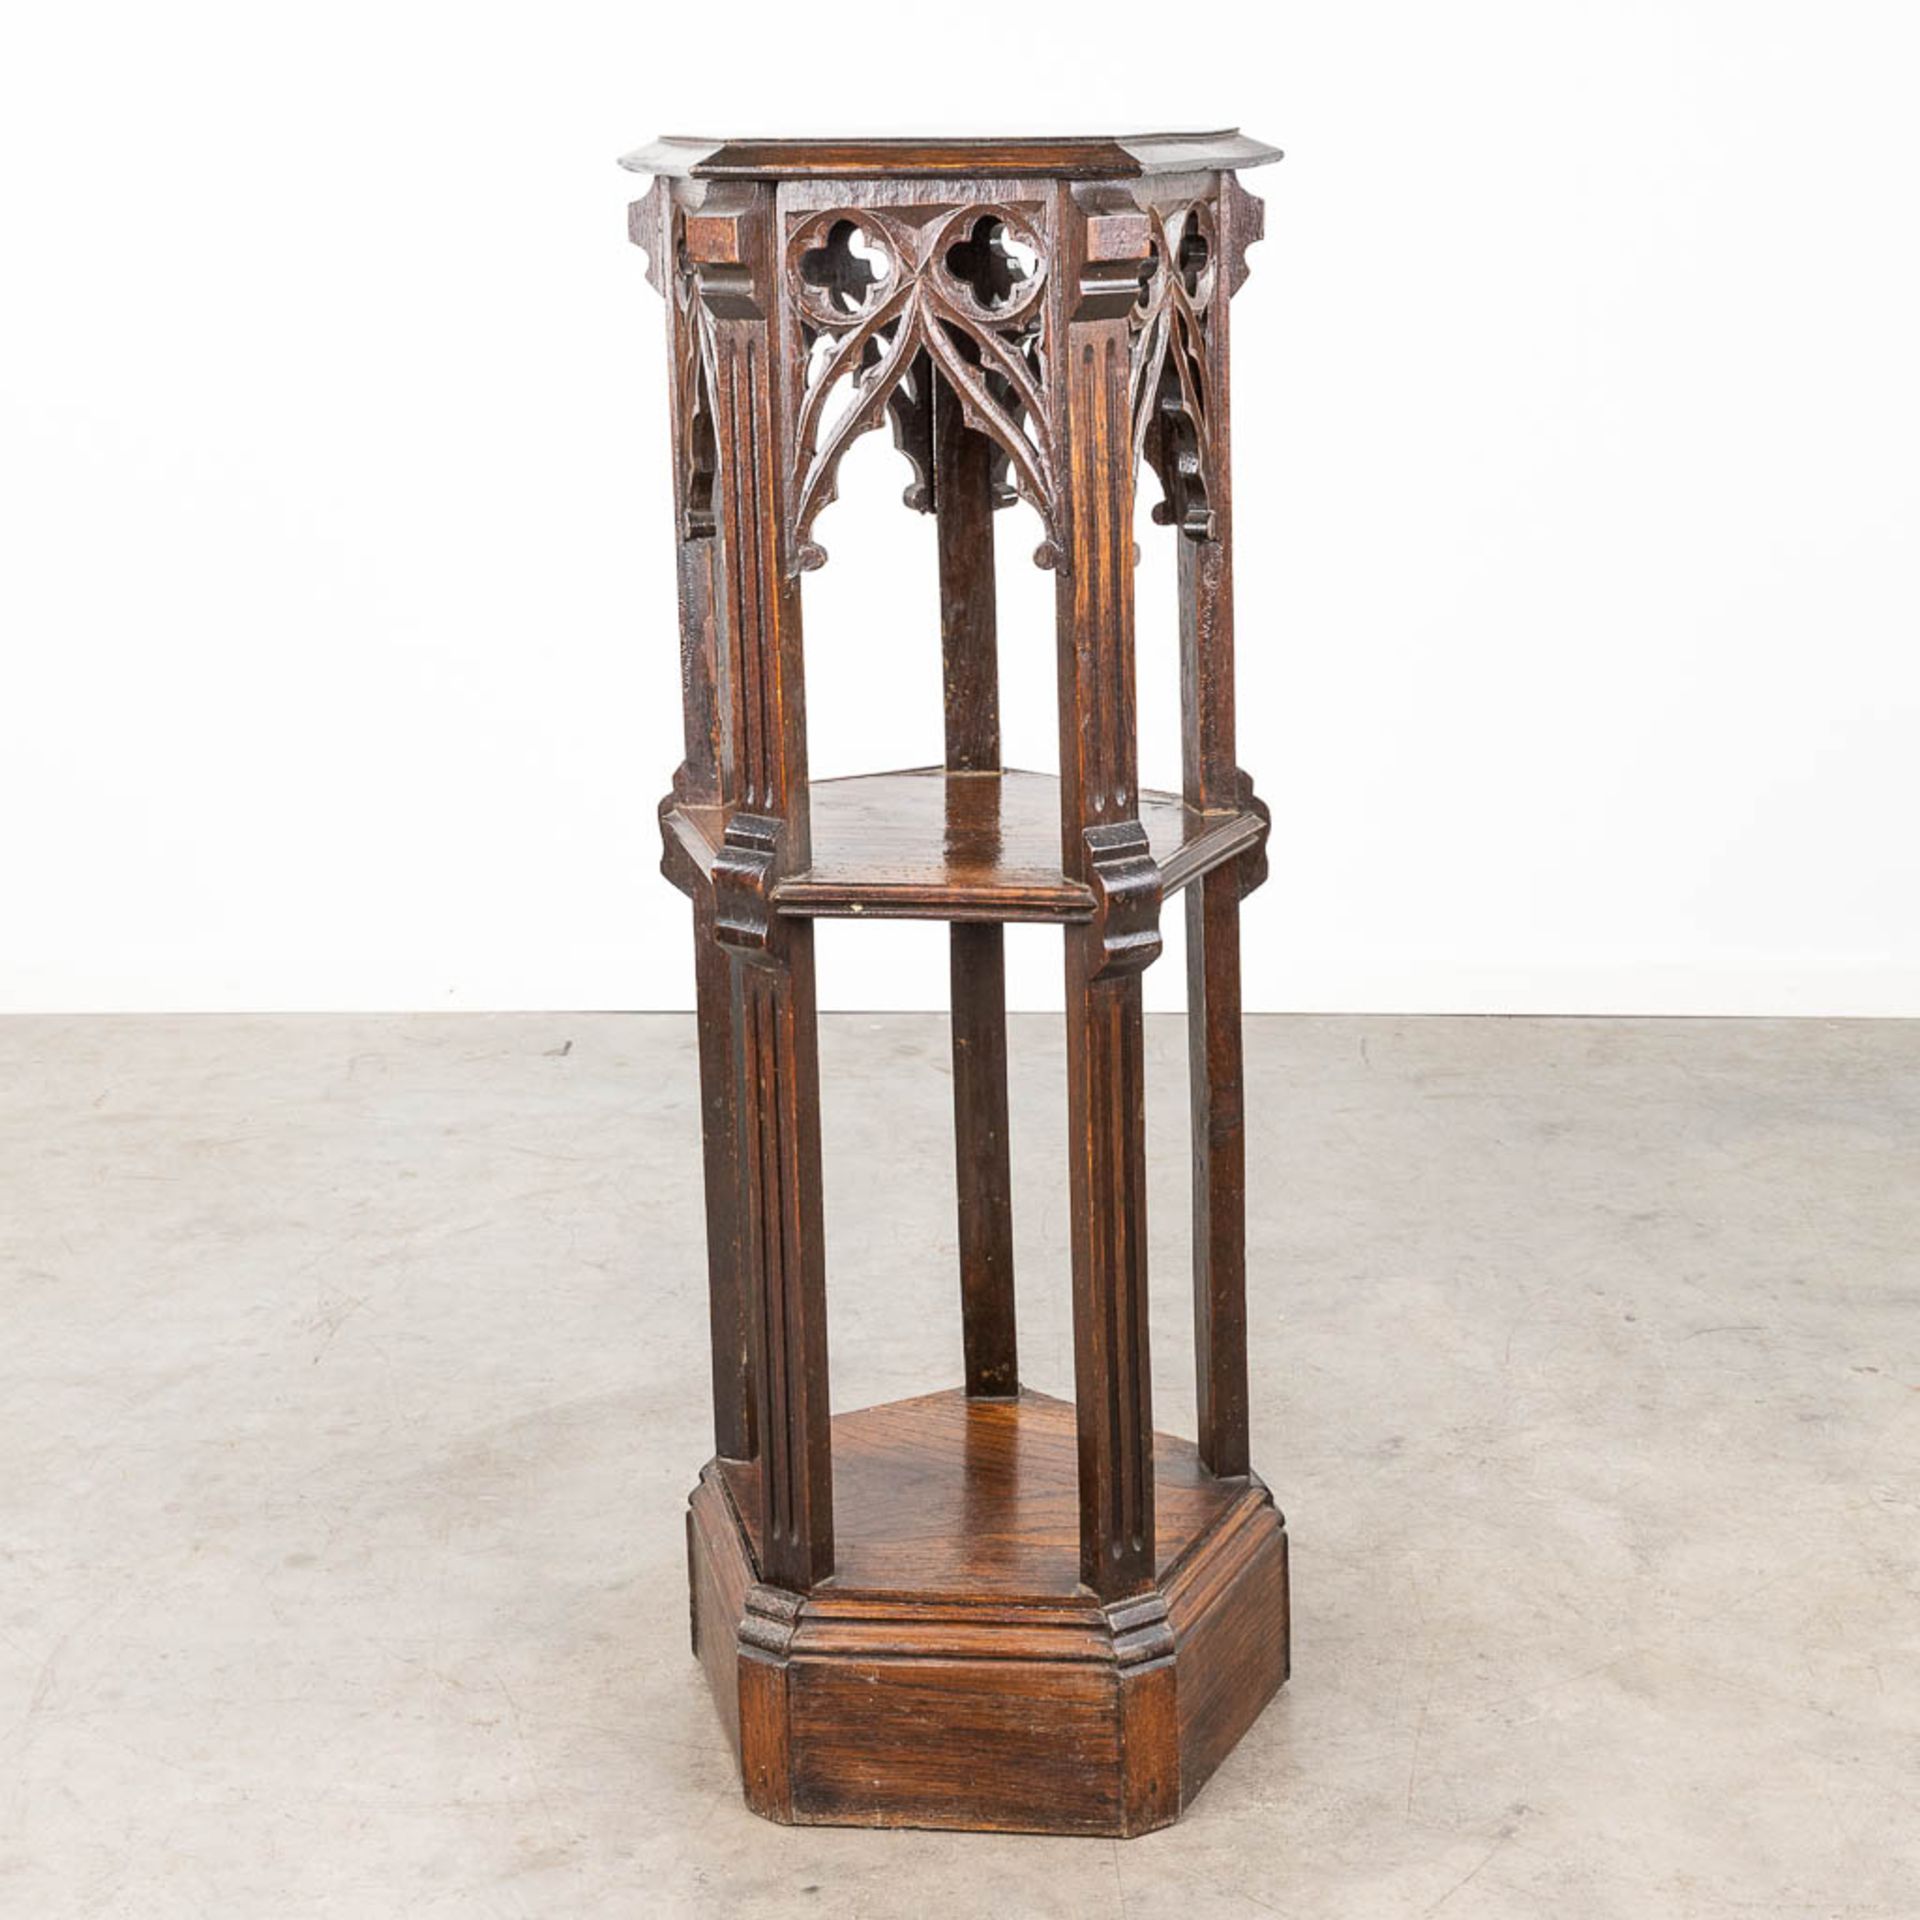 A pentagram pedestal, sculptured wood in Gothic Revival style. 19th C. (L: 41 x W: 46 x H: 111 cm) - Image 5 of 12